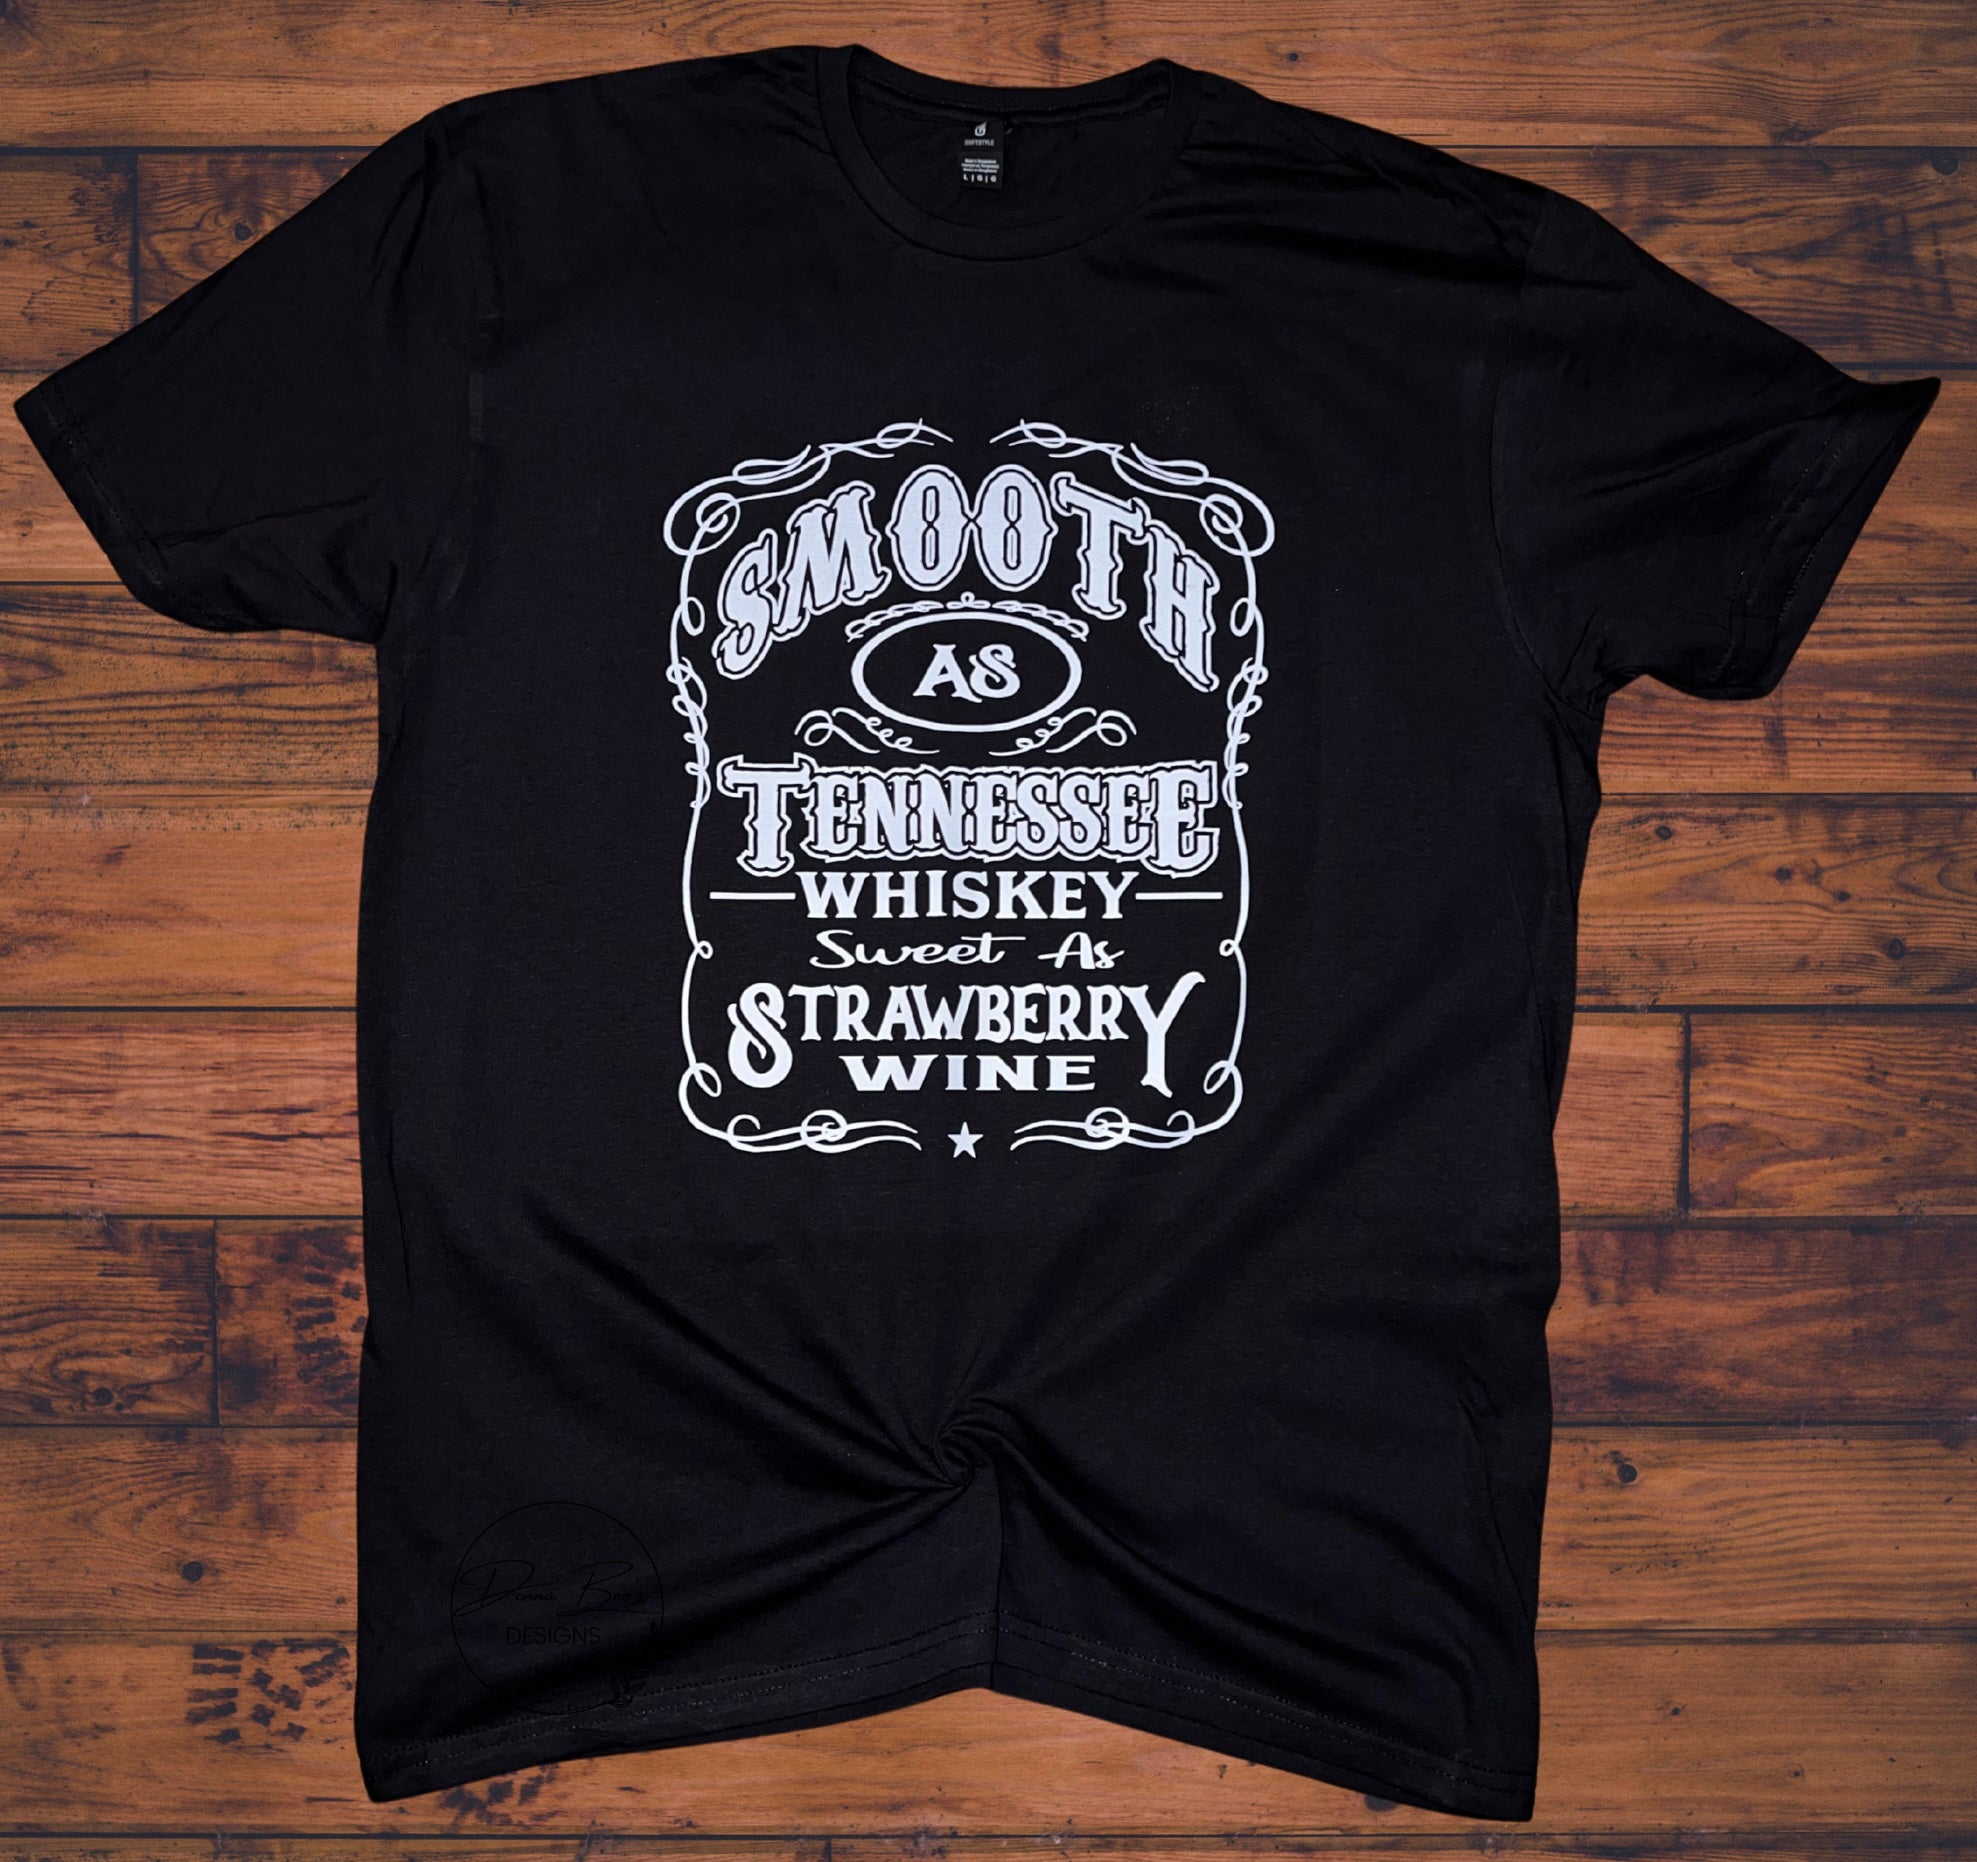 Smooth as Tennessee Whiskey | Sweet as Strawberry Wine T-Shirt